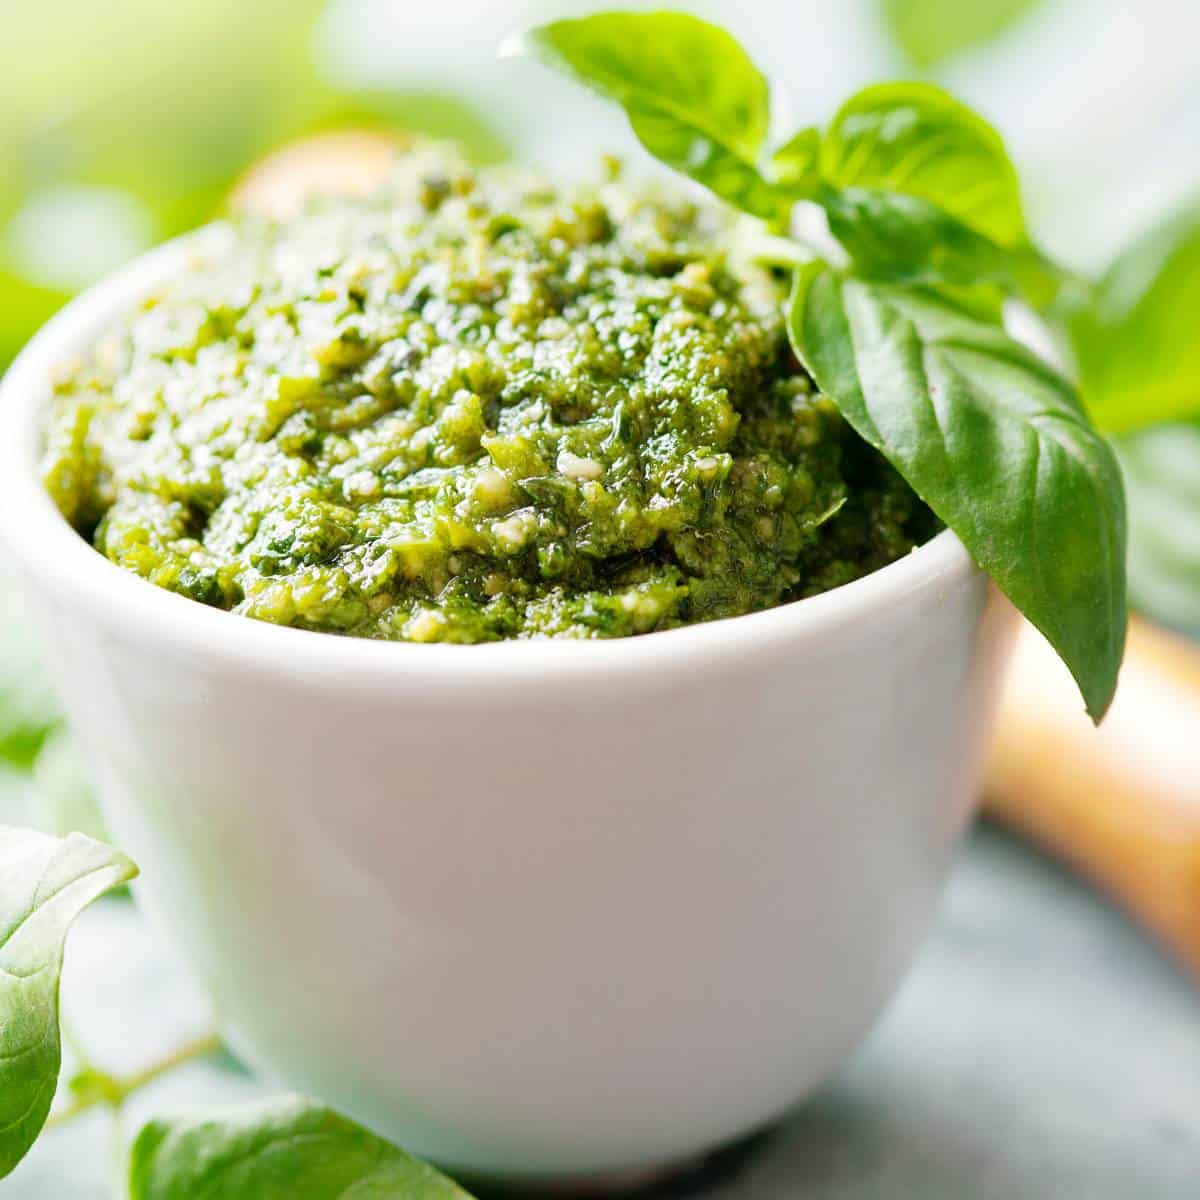 homemade pesto sauce in a white bowl with a sprig of basil